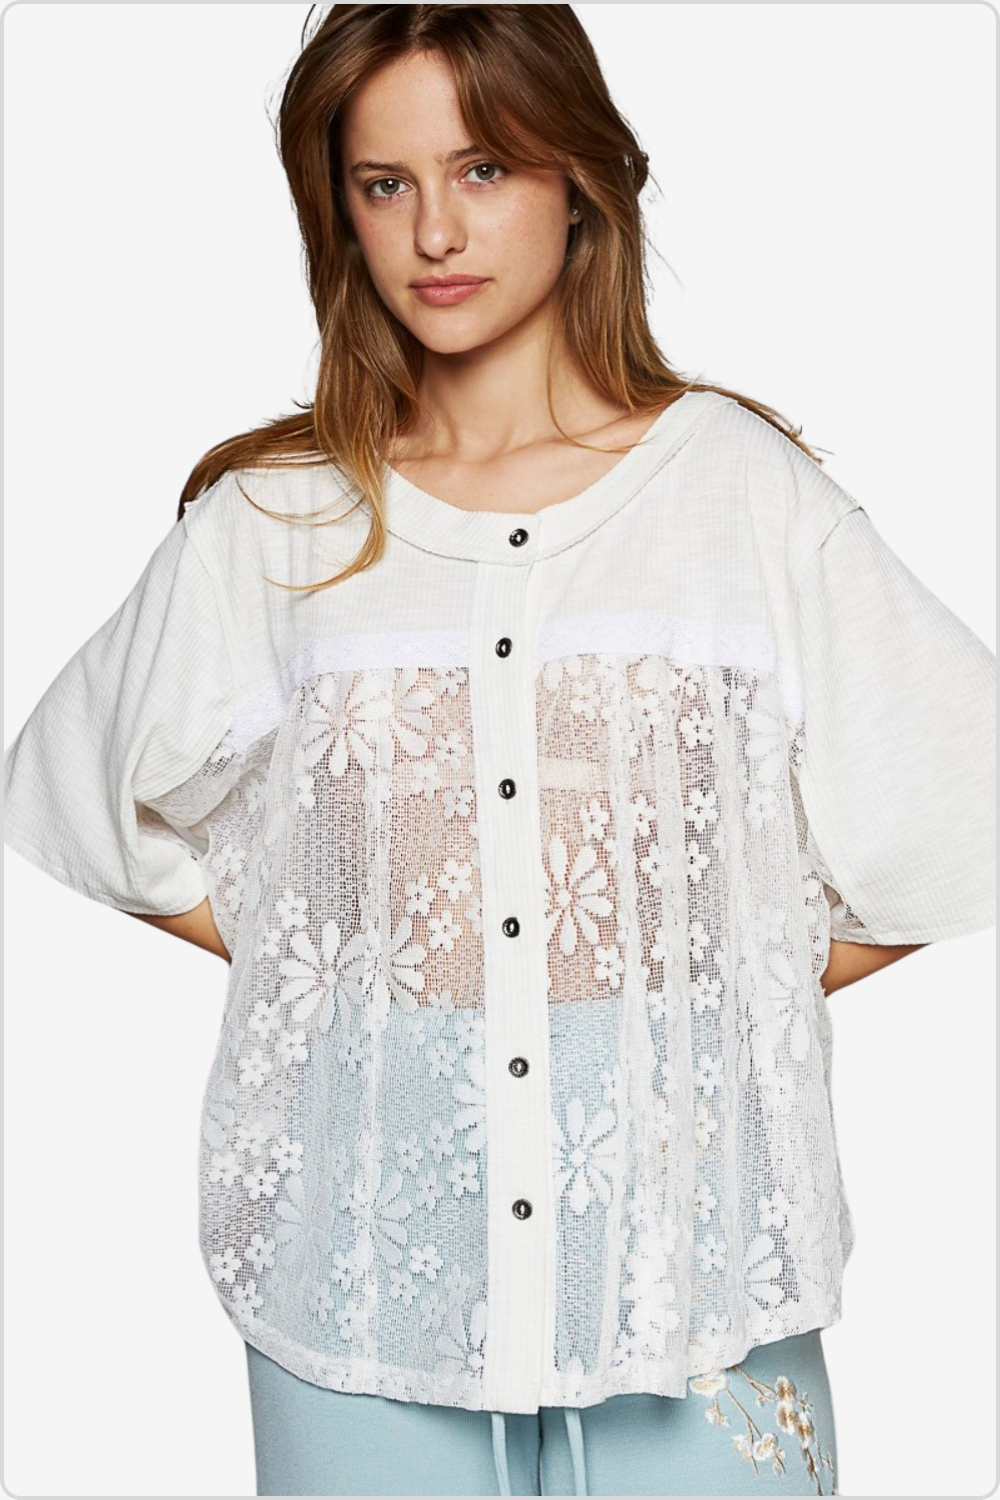 Chic round neck short sleeve lace top, adding elegance to any outfit, front view